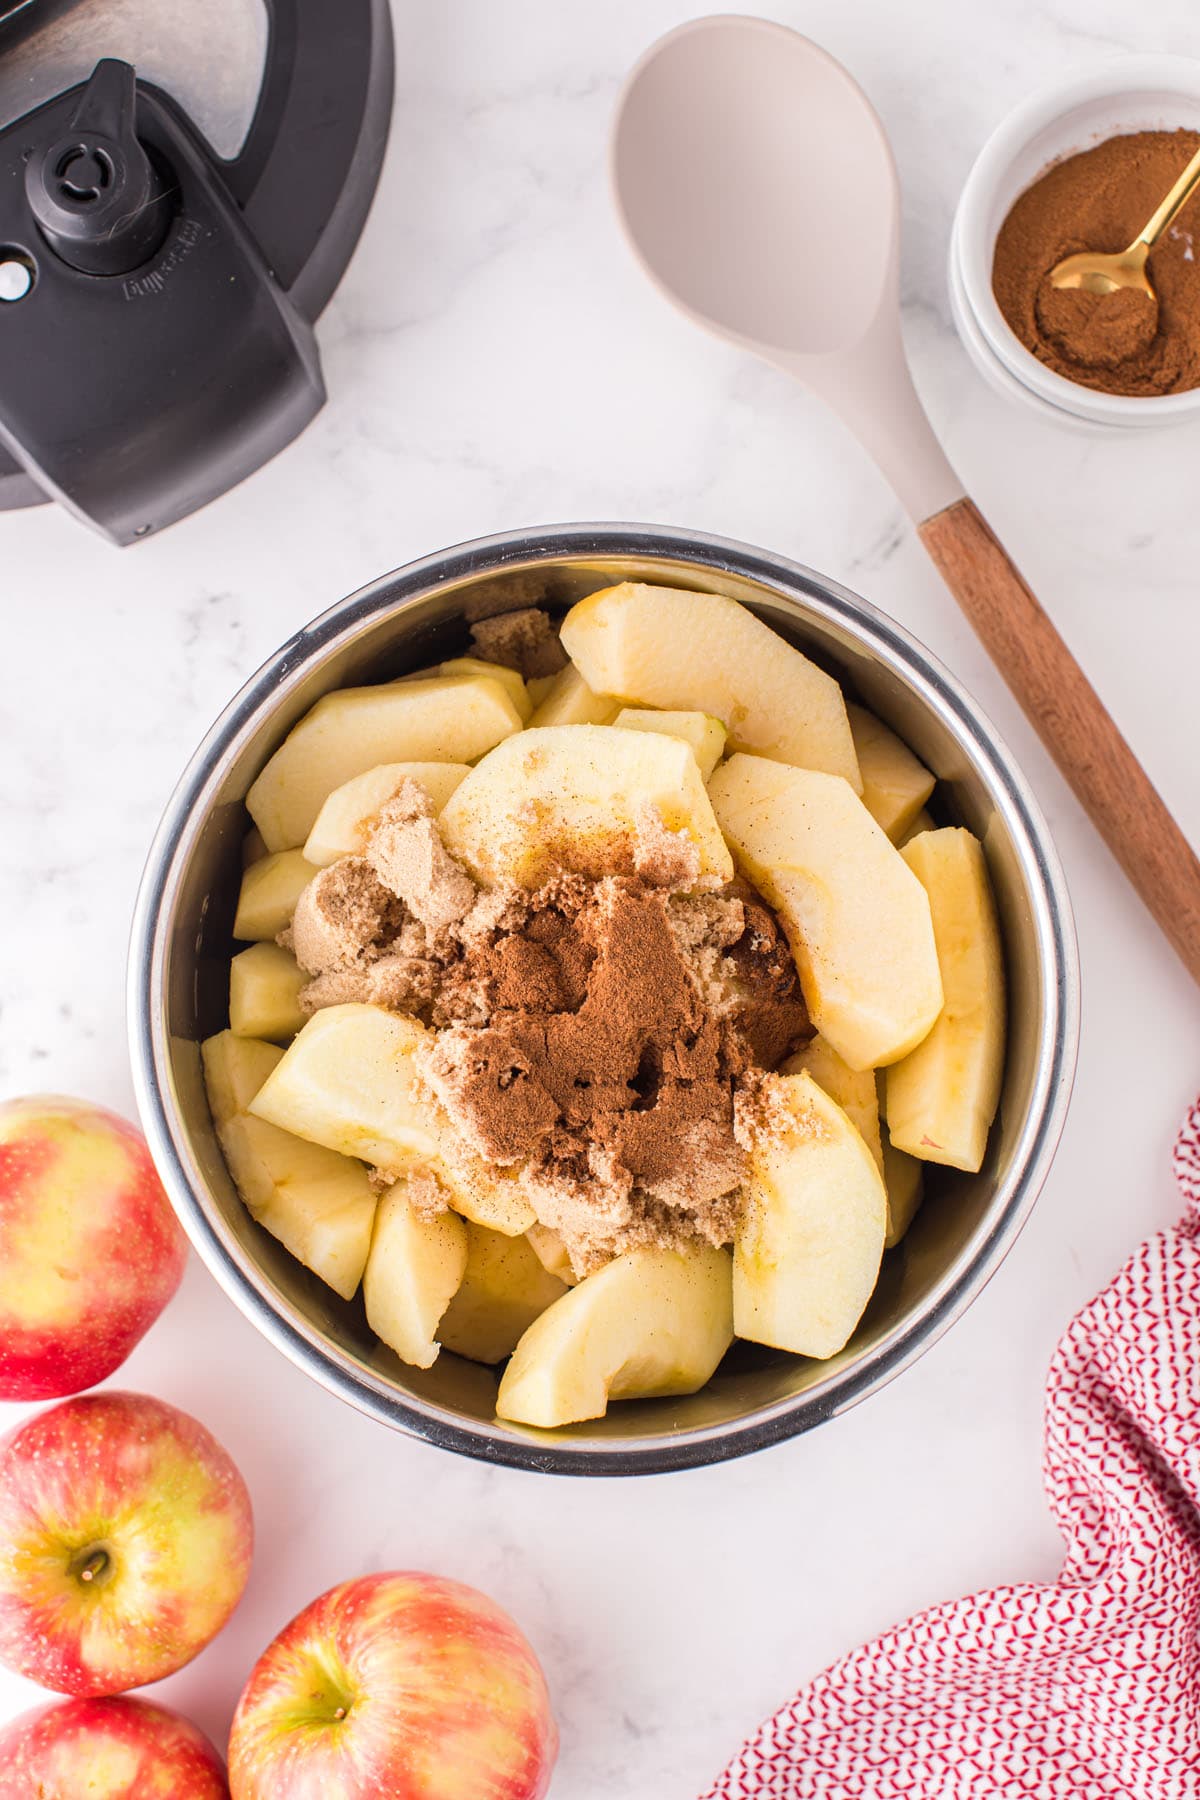 Add apples, water, sugar, and cinnamon to the pressure cooker